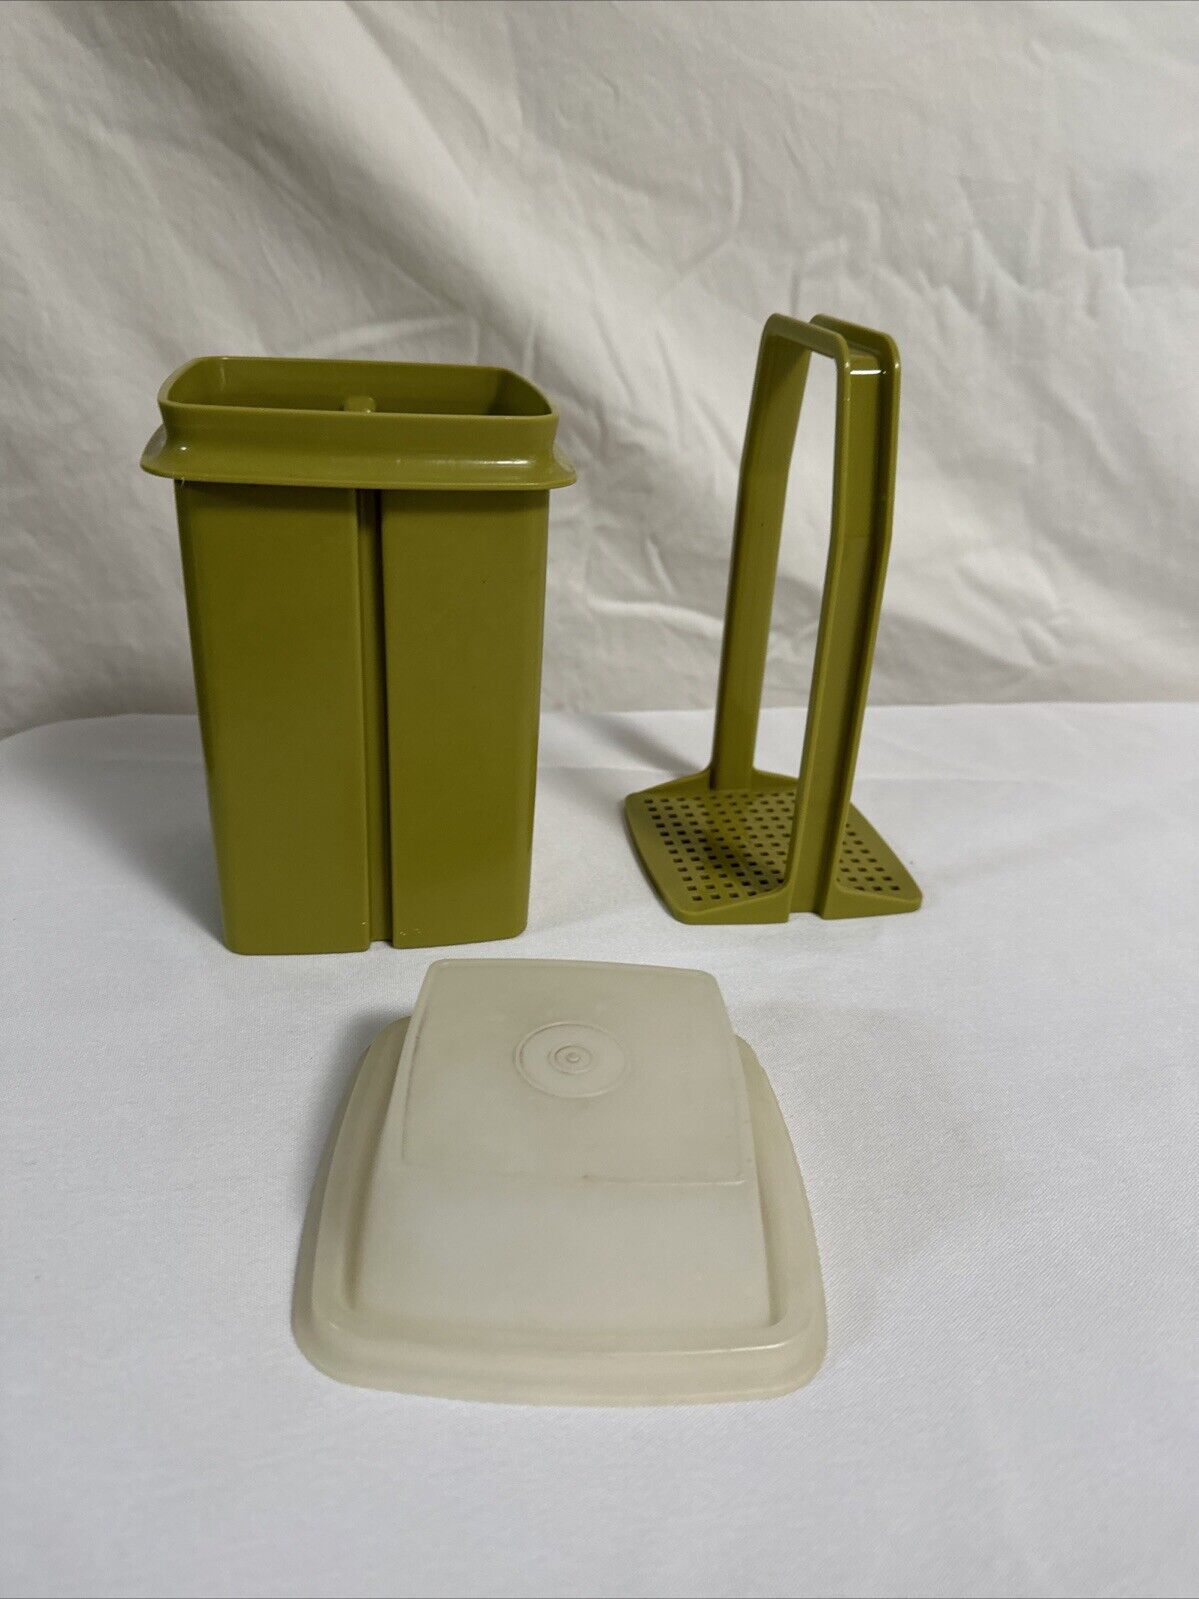 Vintage Tupperware Pickle Keeper Pic-A-Deli Avocado Green 1330-1 With Lifter Lid